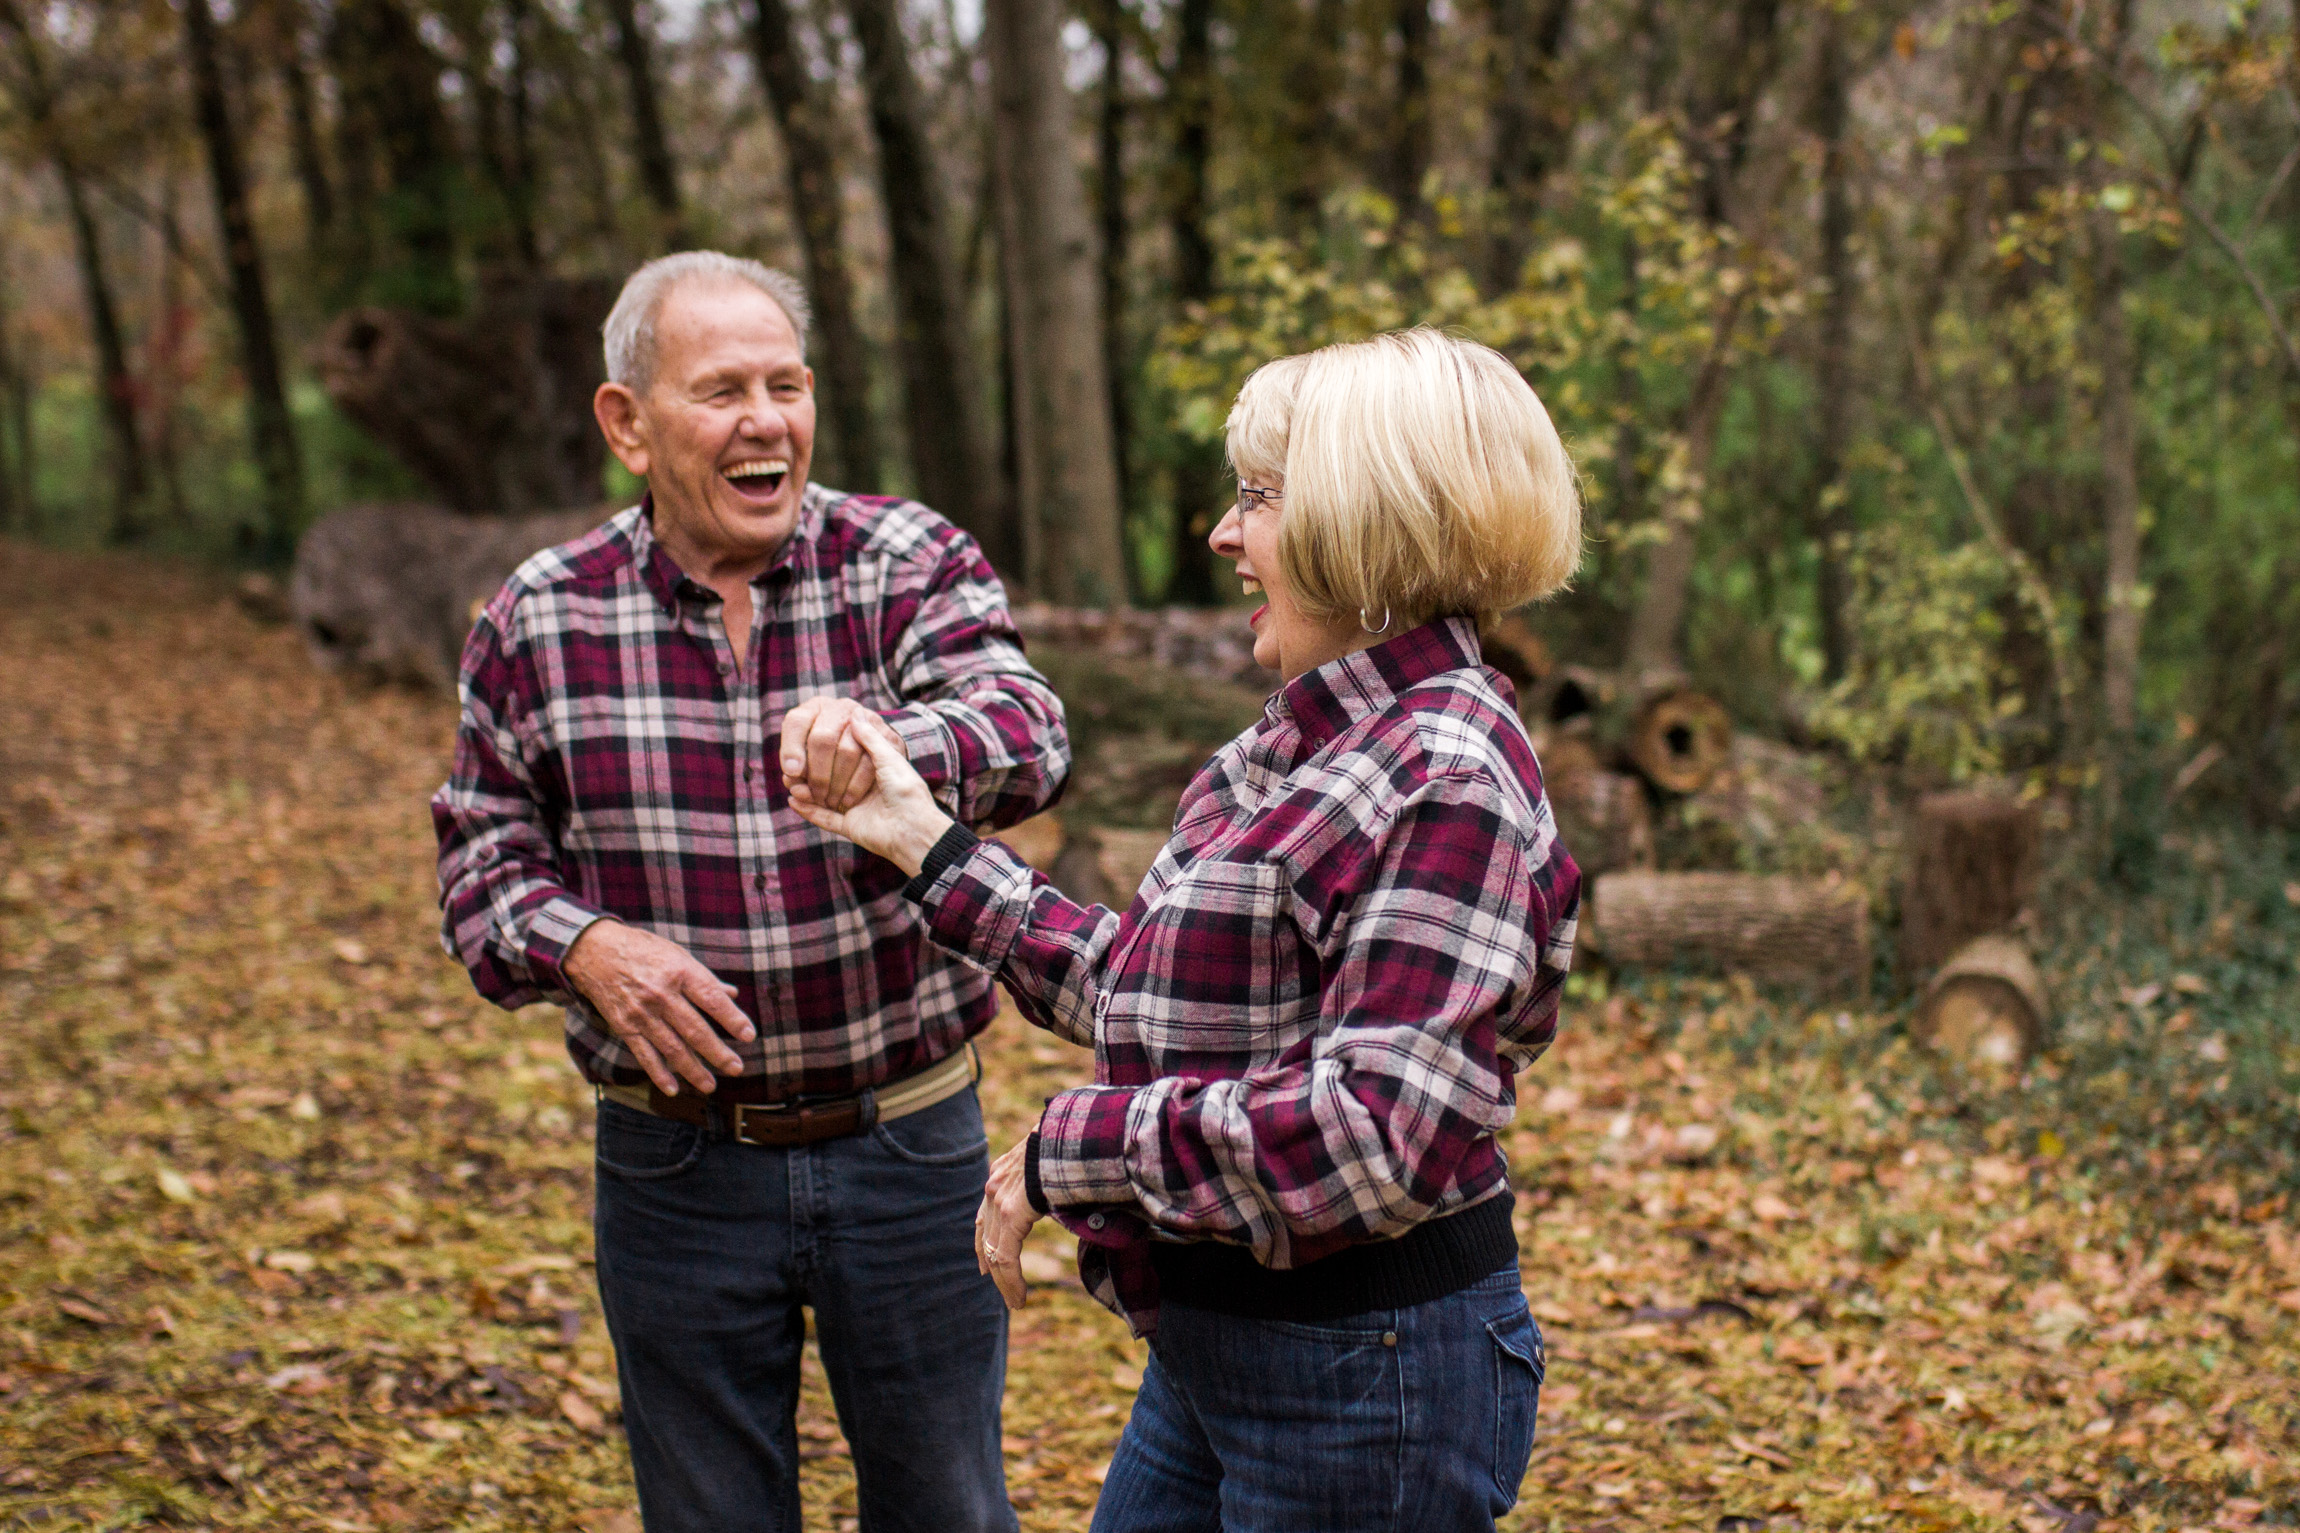  Kansas City lifestyle photographer, Kansas City family photographer, extended family session, fall family photos in the woods, older couple dancing, grandparents portrait 